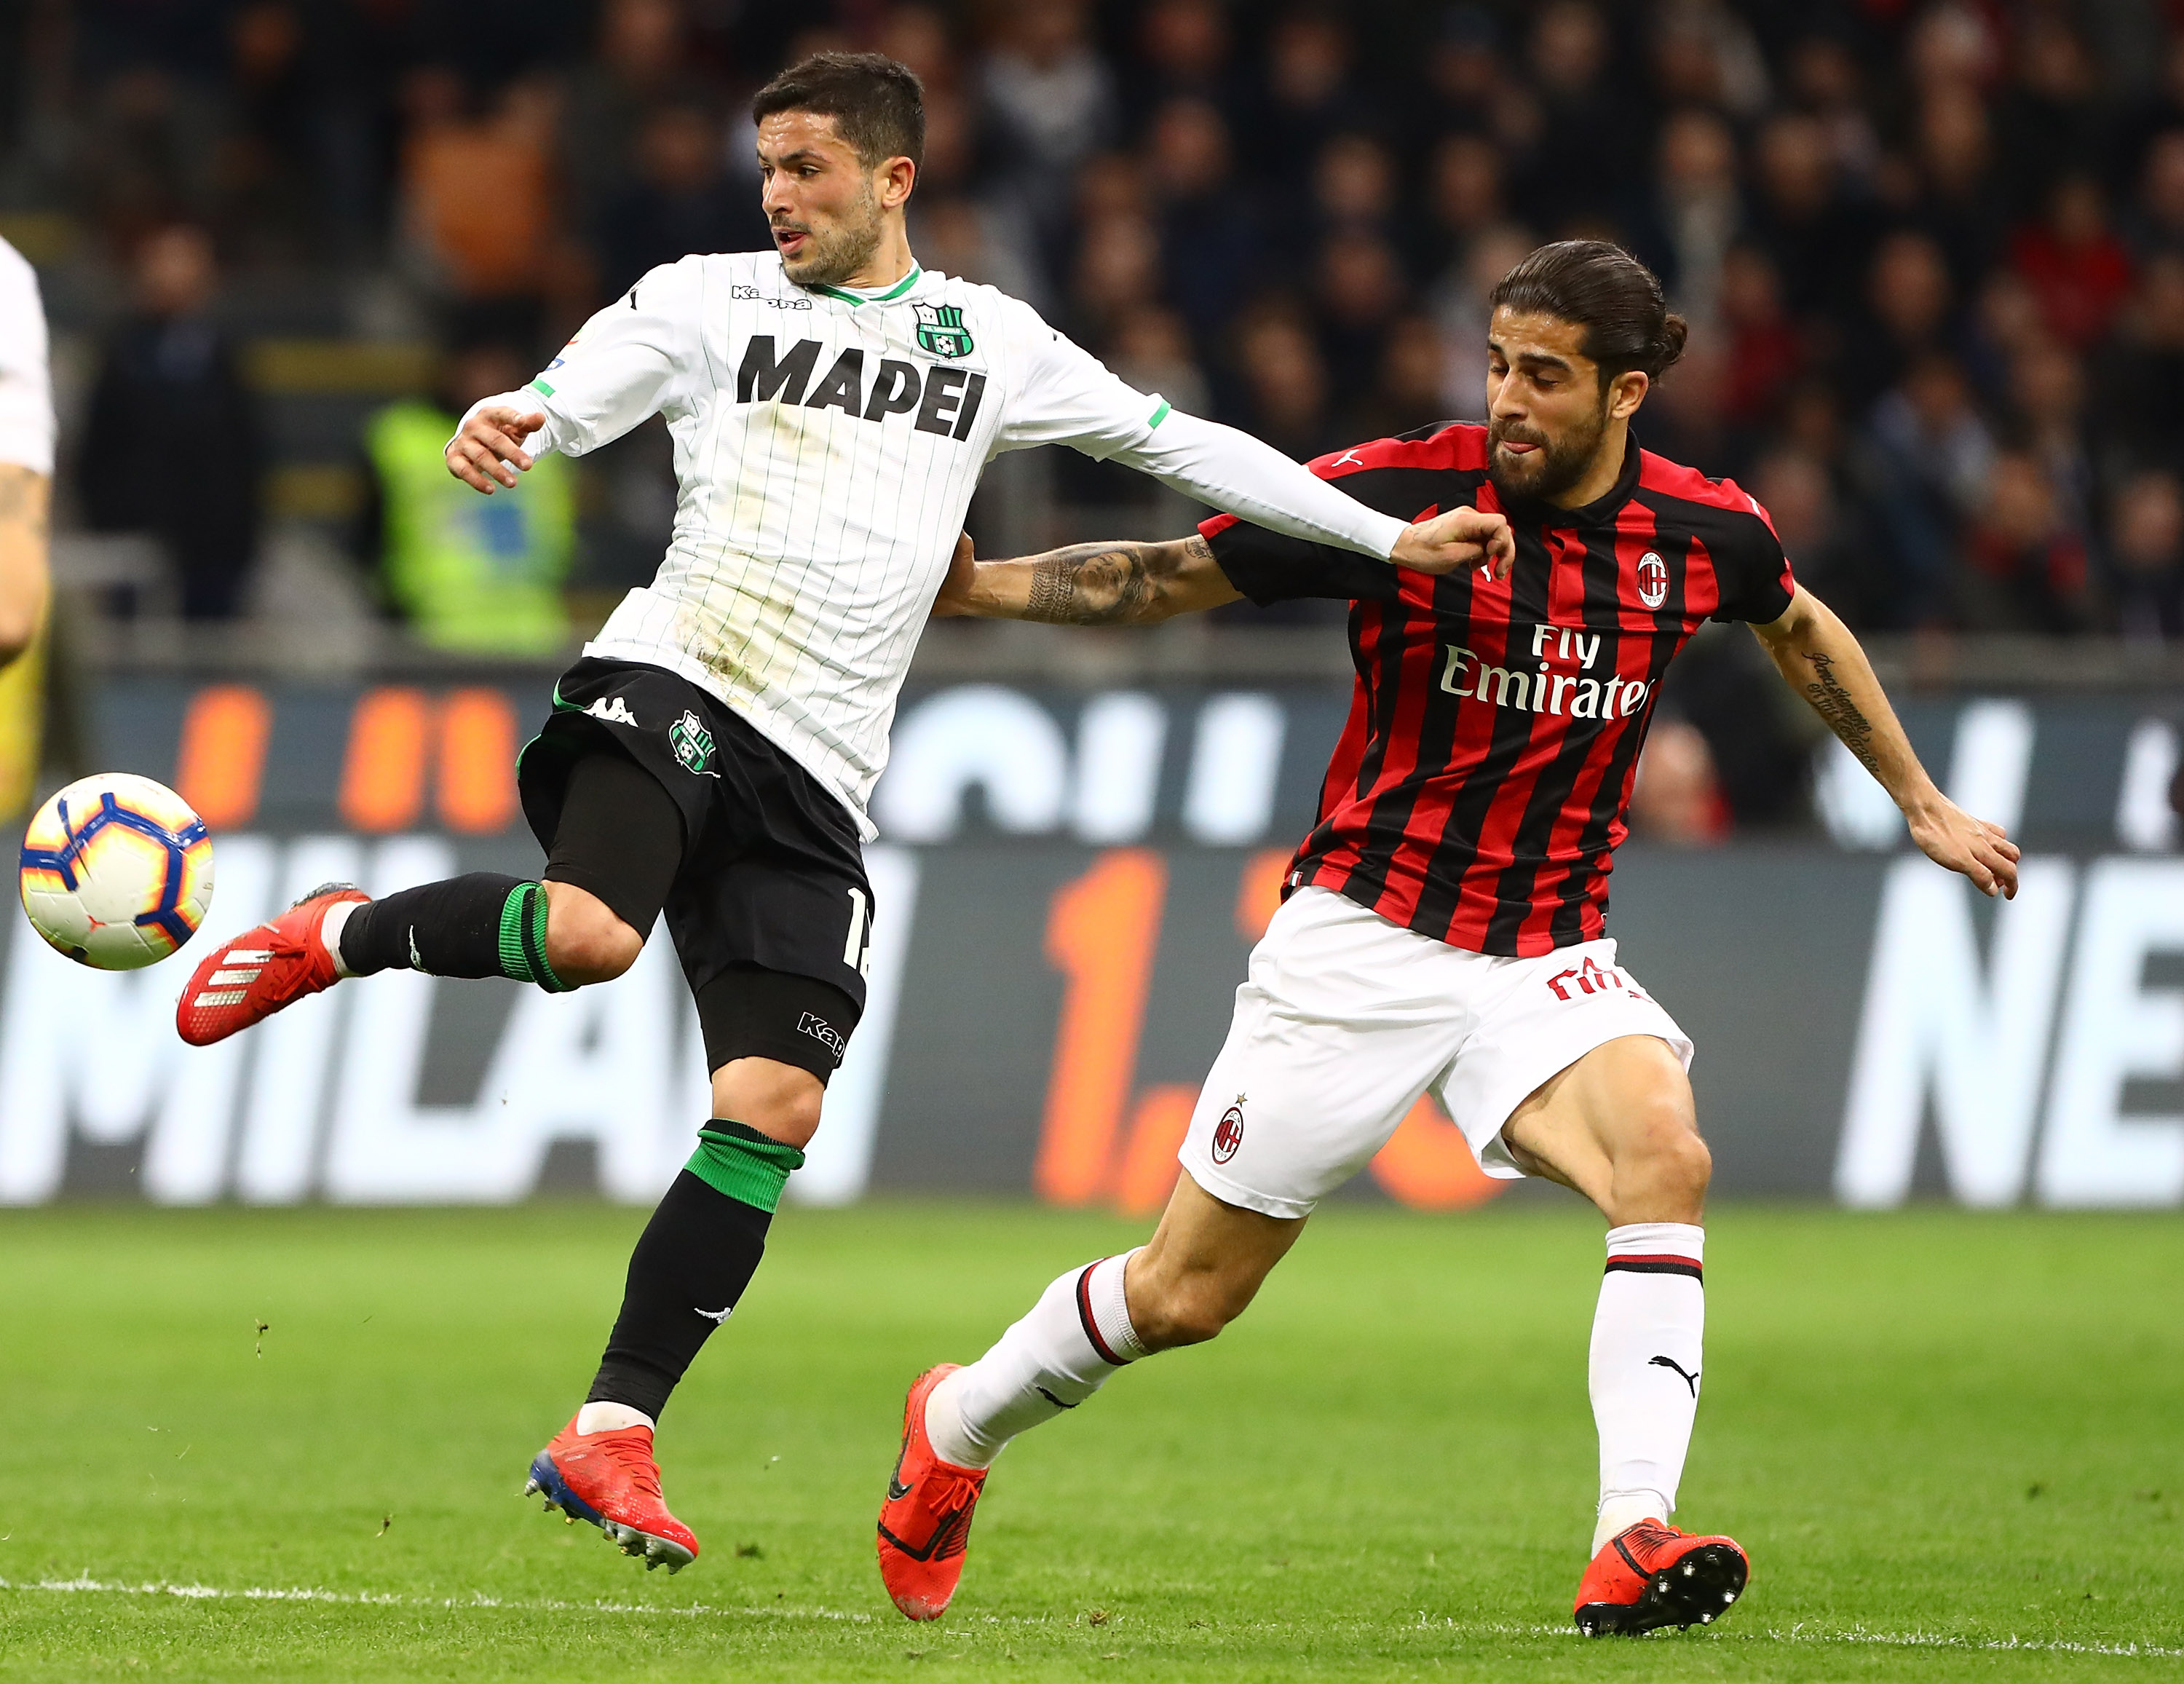 MILAN, ITALY - MARCH 02: Stefano Sensi of US Sassuolo is challenged by Ricardo Rodriguez of AC Milan during the Serie A match between AC Milan and US Sassuolo at Stadio Giuseppe Meazza on March 2, 2019 in Milan, Italy. (Photo by Marco Luzzani/Getty Images)